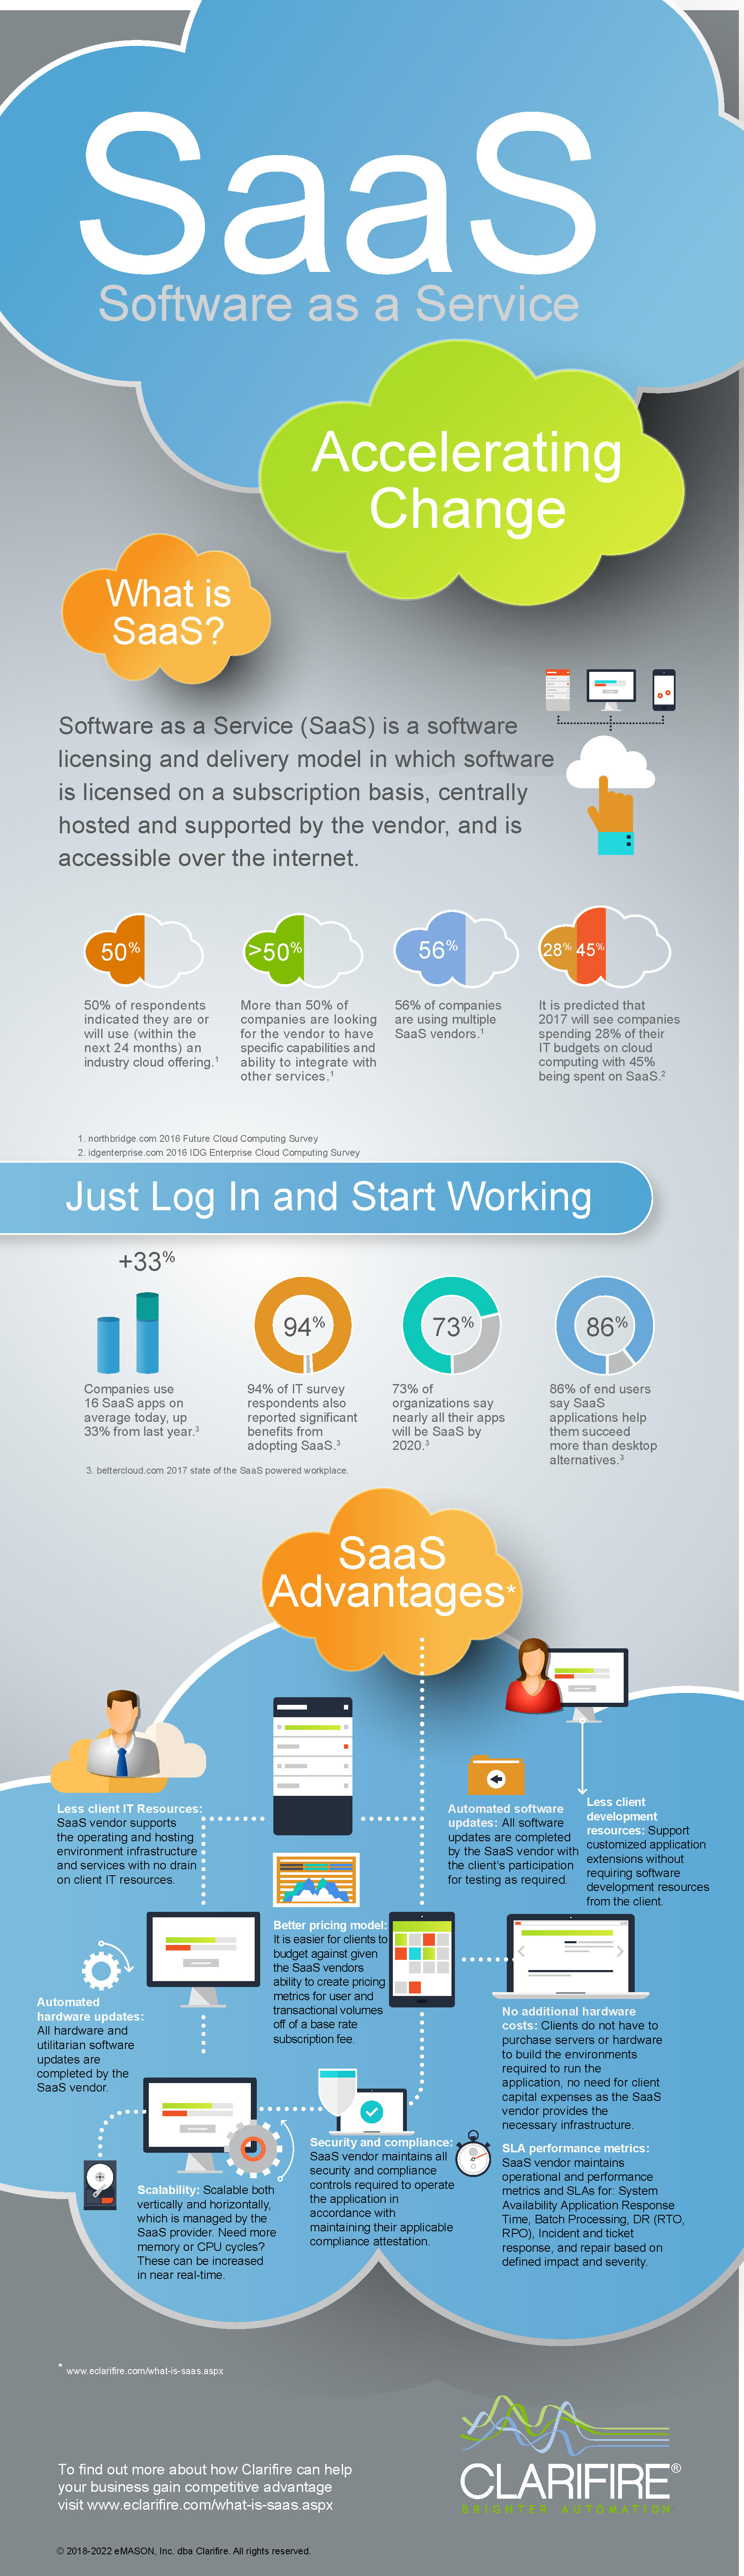 Saas and cloud computing infographic focusing on IT Support and Cloud Integration.